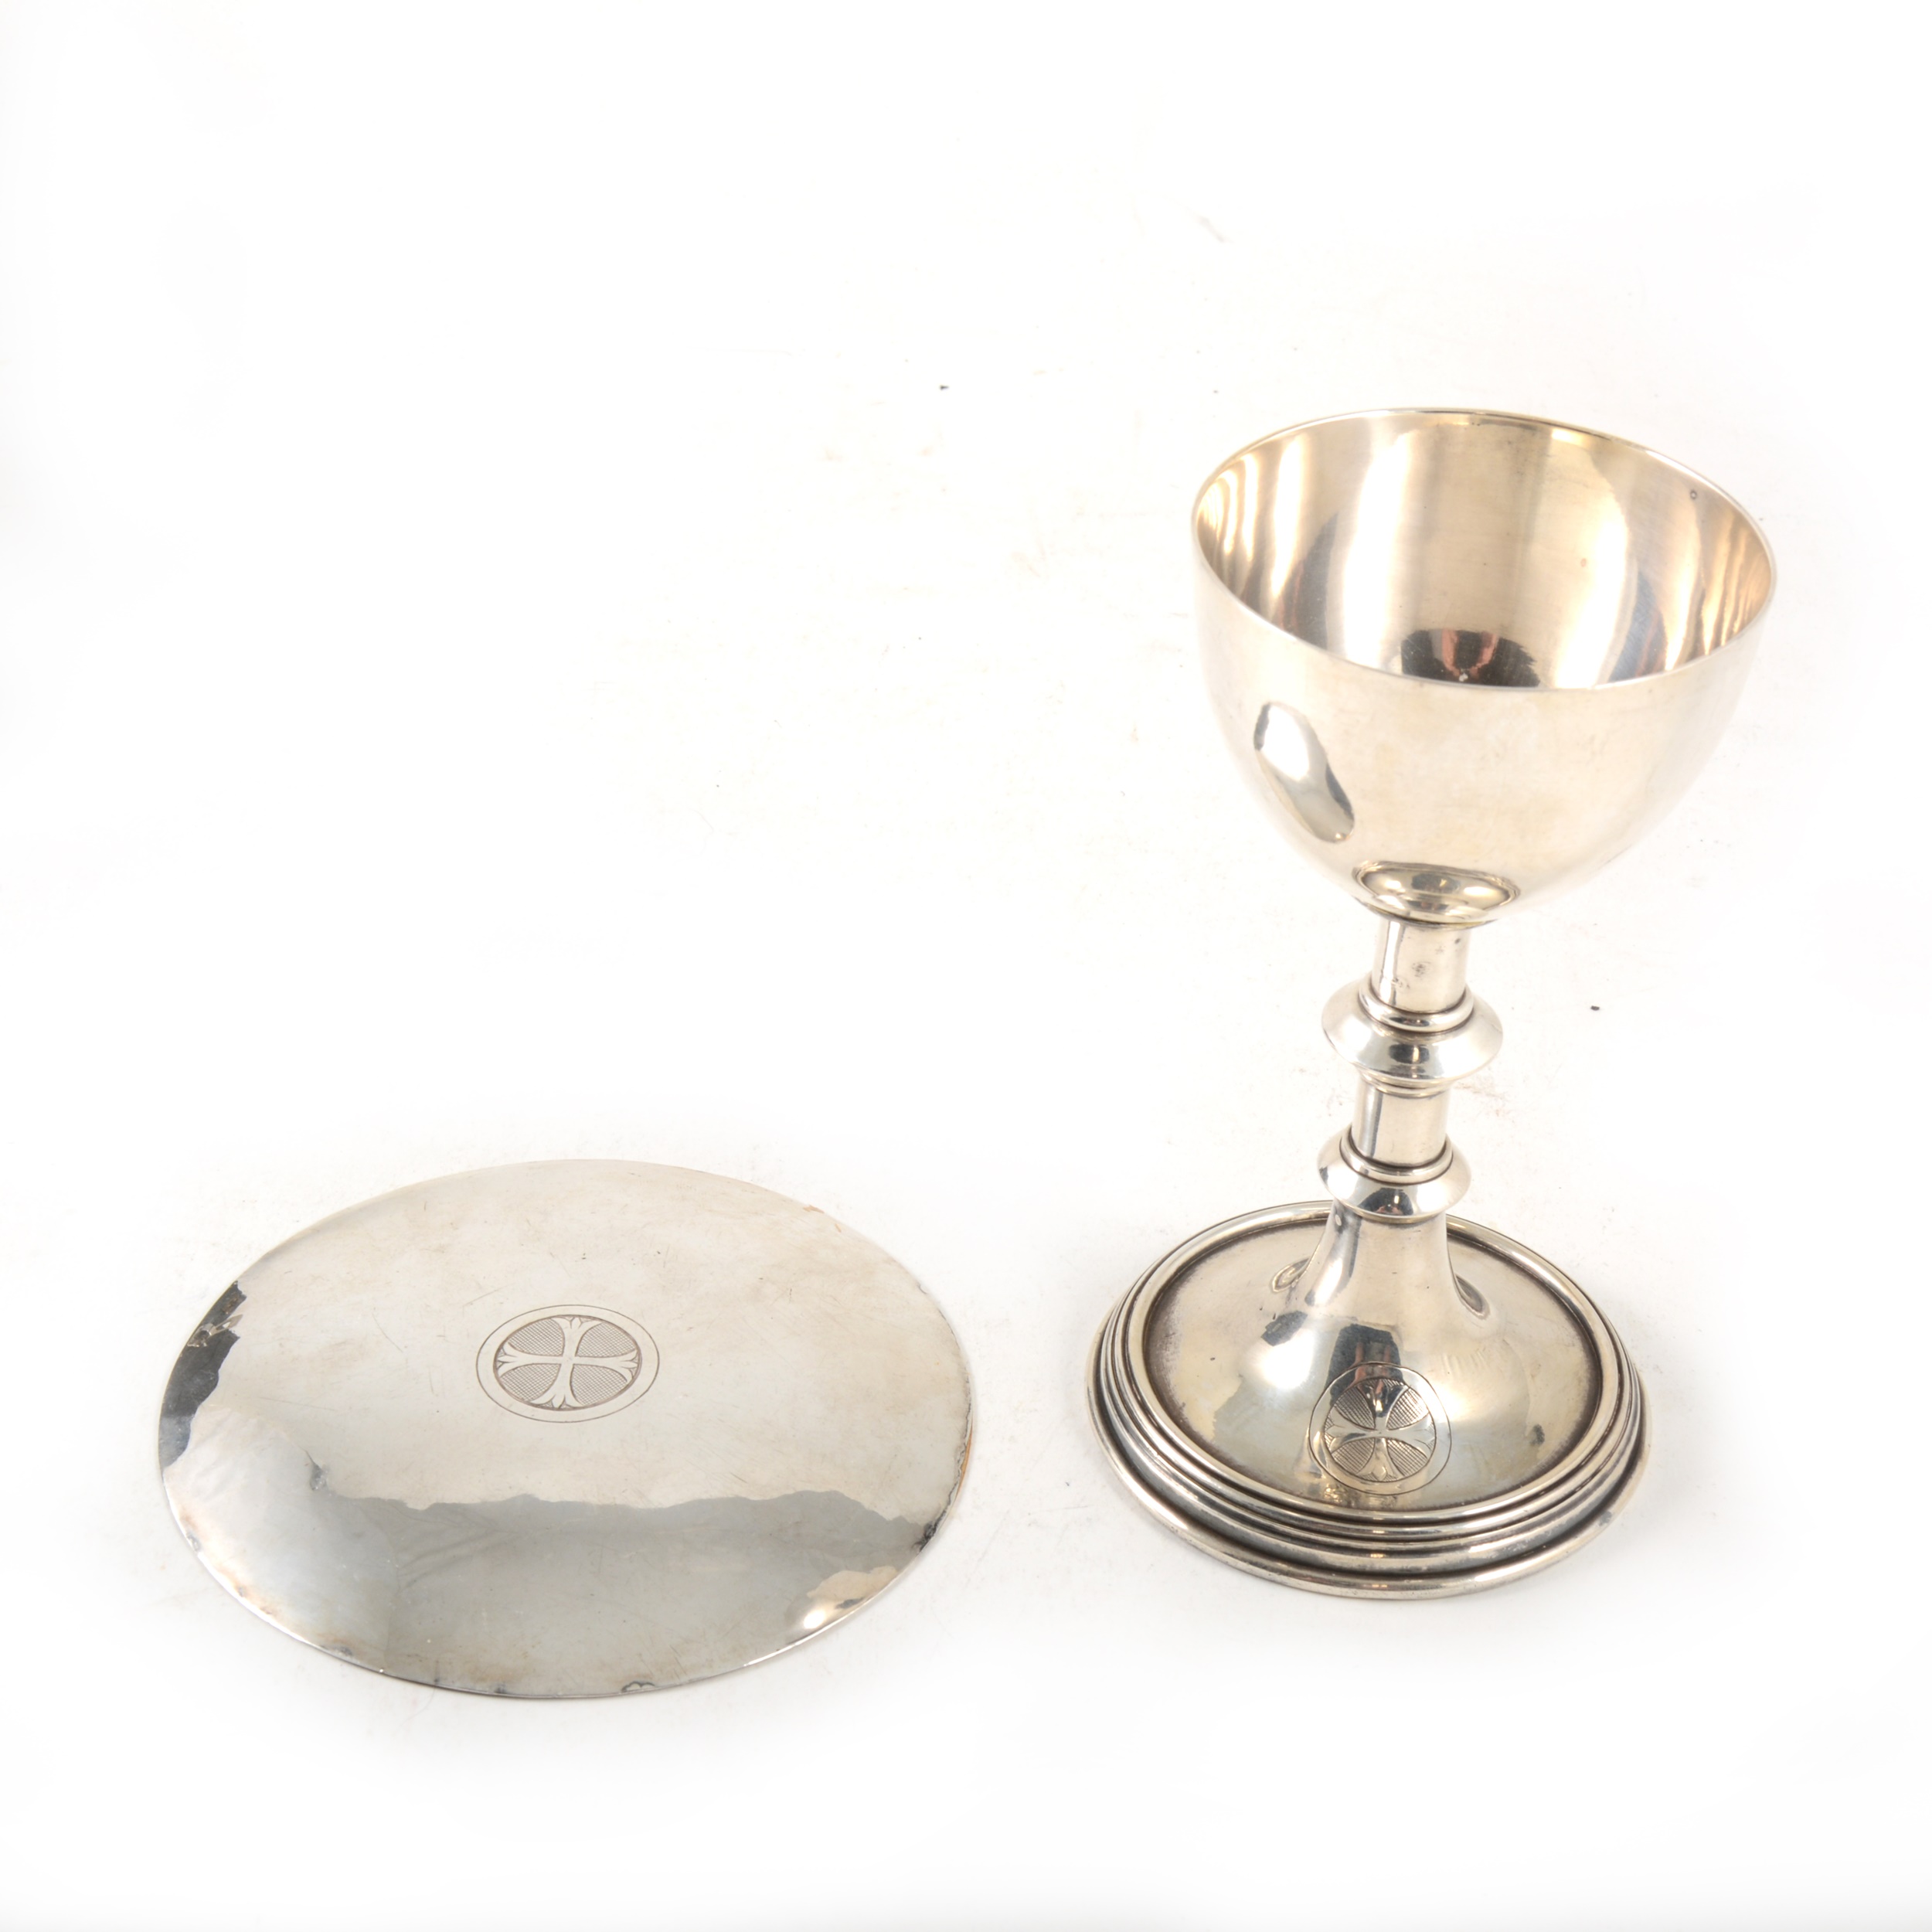 Two travelling communion sets, one silver, the other plated, and another paten and chalice. - Image 2 of 5